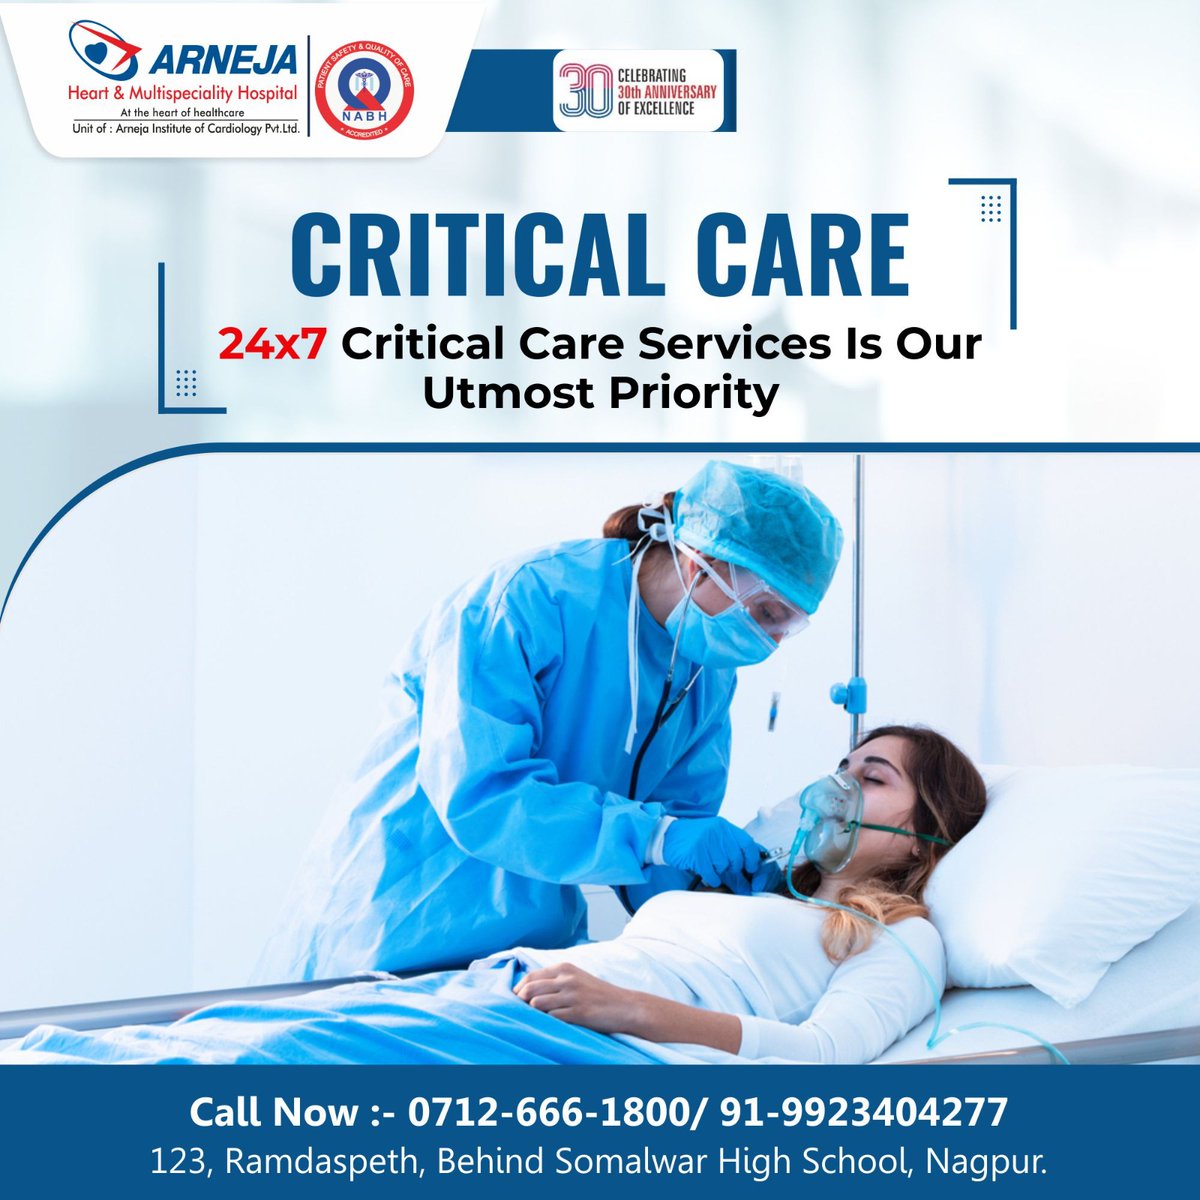 Our Critical Care Department provides round-the-clock support, ensuring patients in critical conditions receive timely life-saving interventions and compassionate care.
#NABH #besthospital #besthospital #NABH #infrastructure #ambulanceservice #criticalcare #24x7Support